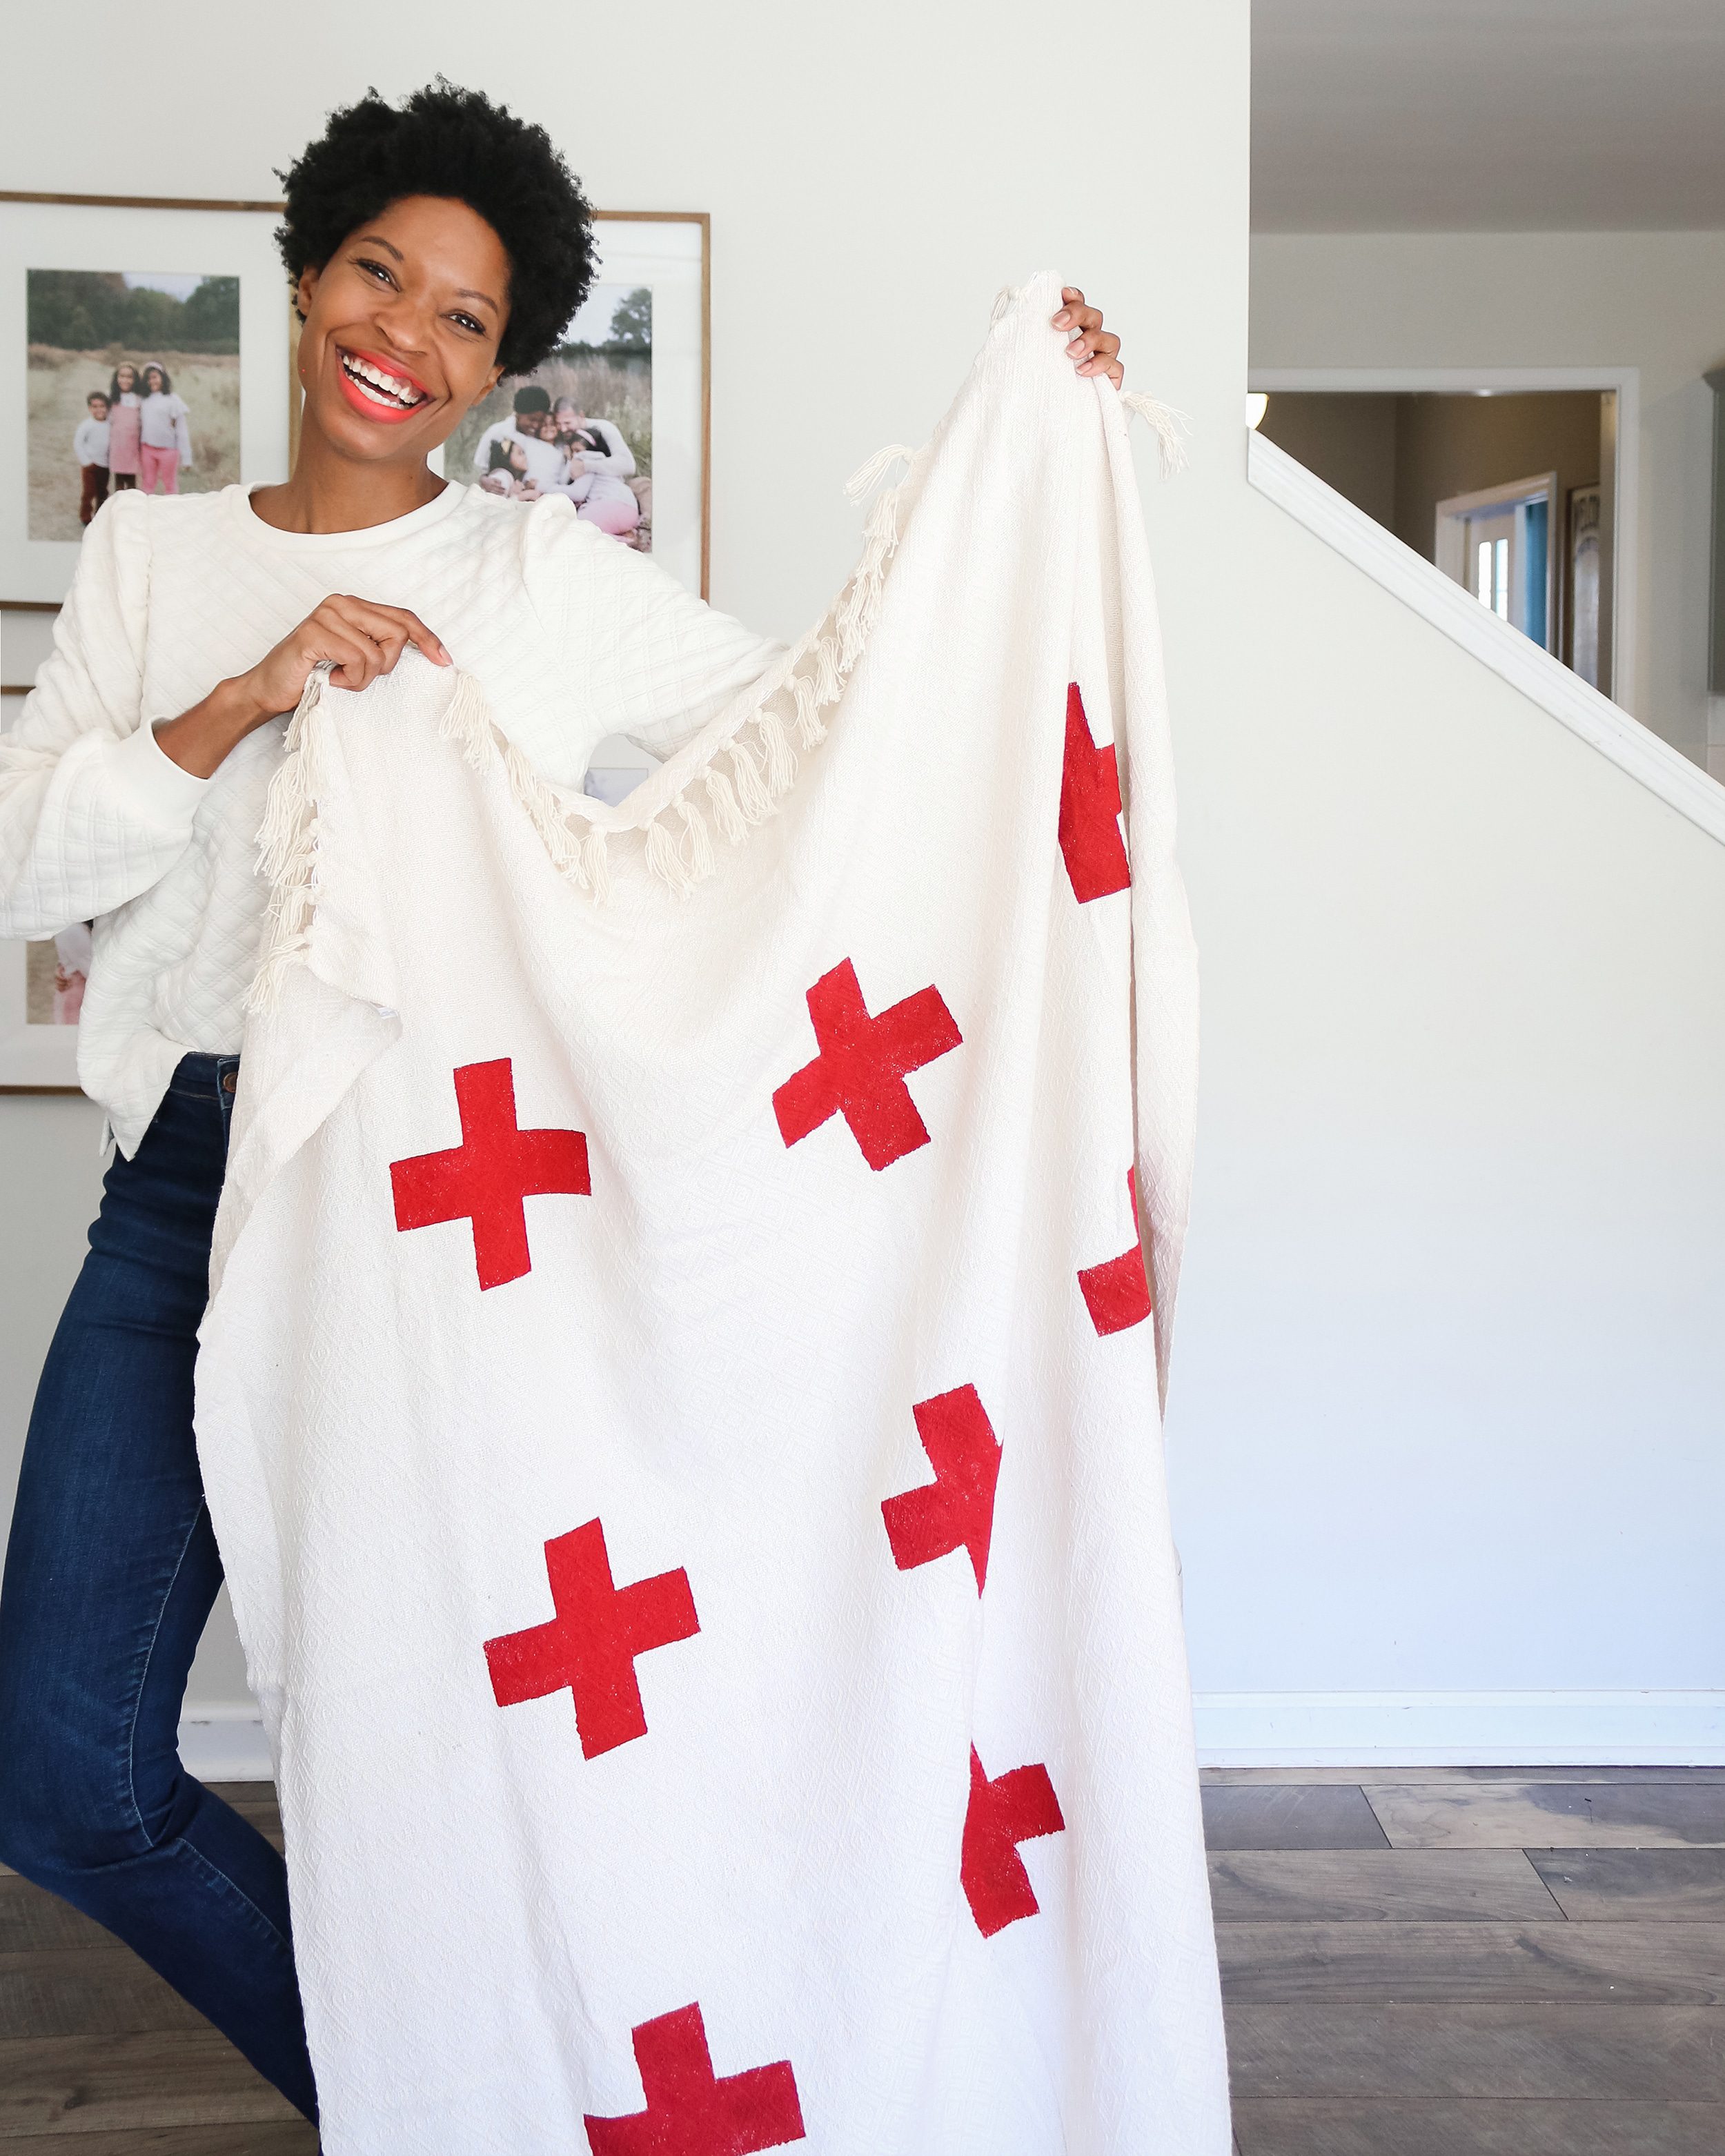 Tiffany's DIY blanket dupe! @prettyrealblog | What's your favorite 1-day DIY? 